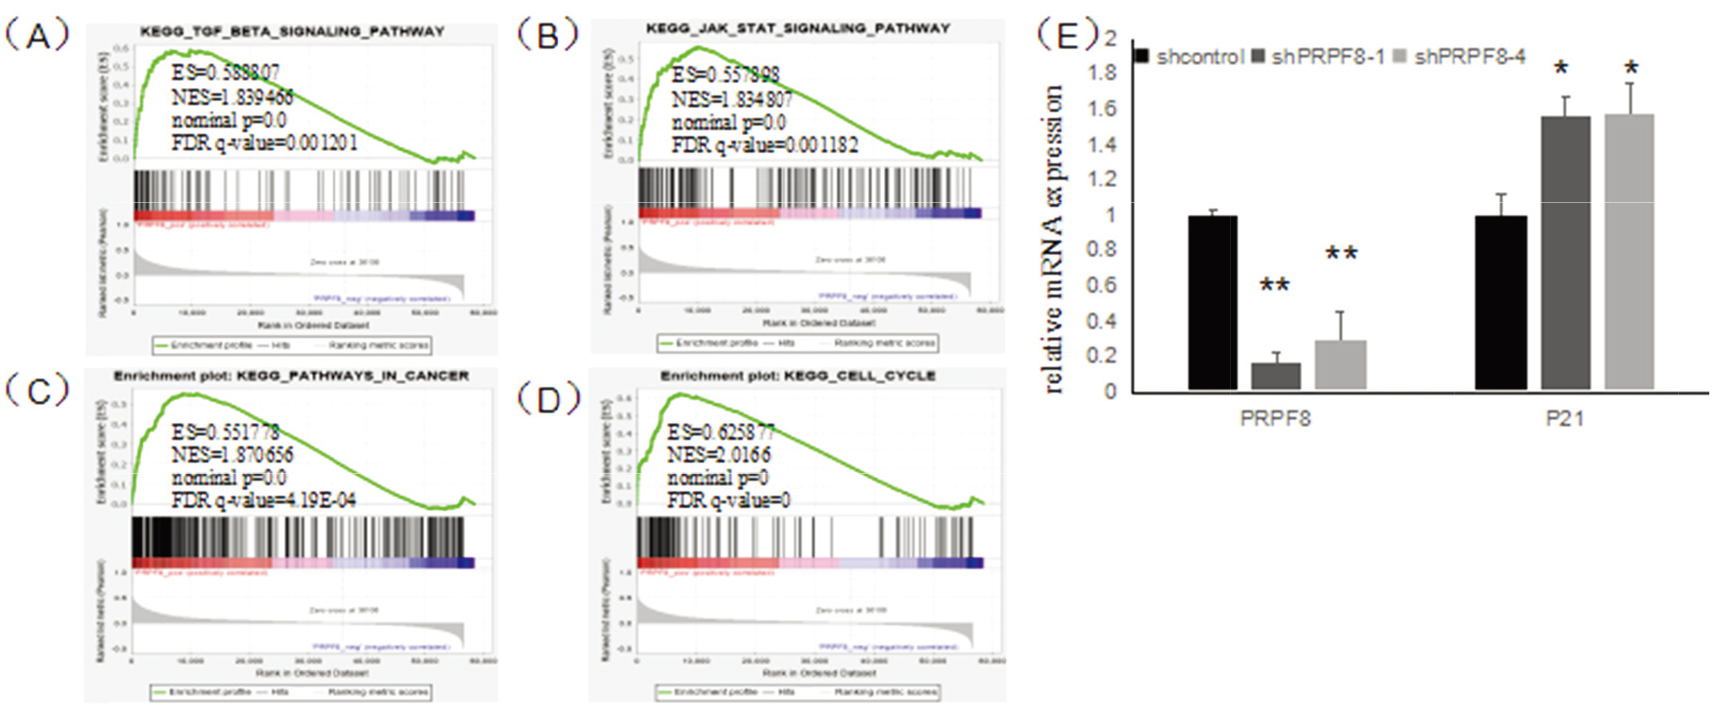 (A) GSEA results show TGF-β signaling pathway is associated with PRPF8 expression. (B) GSEA results show JAK-STAT pathway is associated with PRPF8 expression. (C) GSEA results show pathways in cancer are associated with PRPF8 expression. (D) GSEA results show cell cycle pathway is associated with PRPF8 expression. (E) Inhibition of PRPF8 expression upregulated p⁢21 mRNA expression.